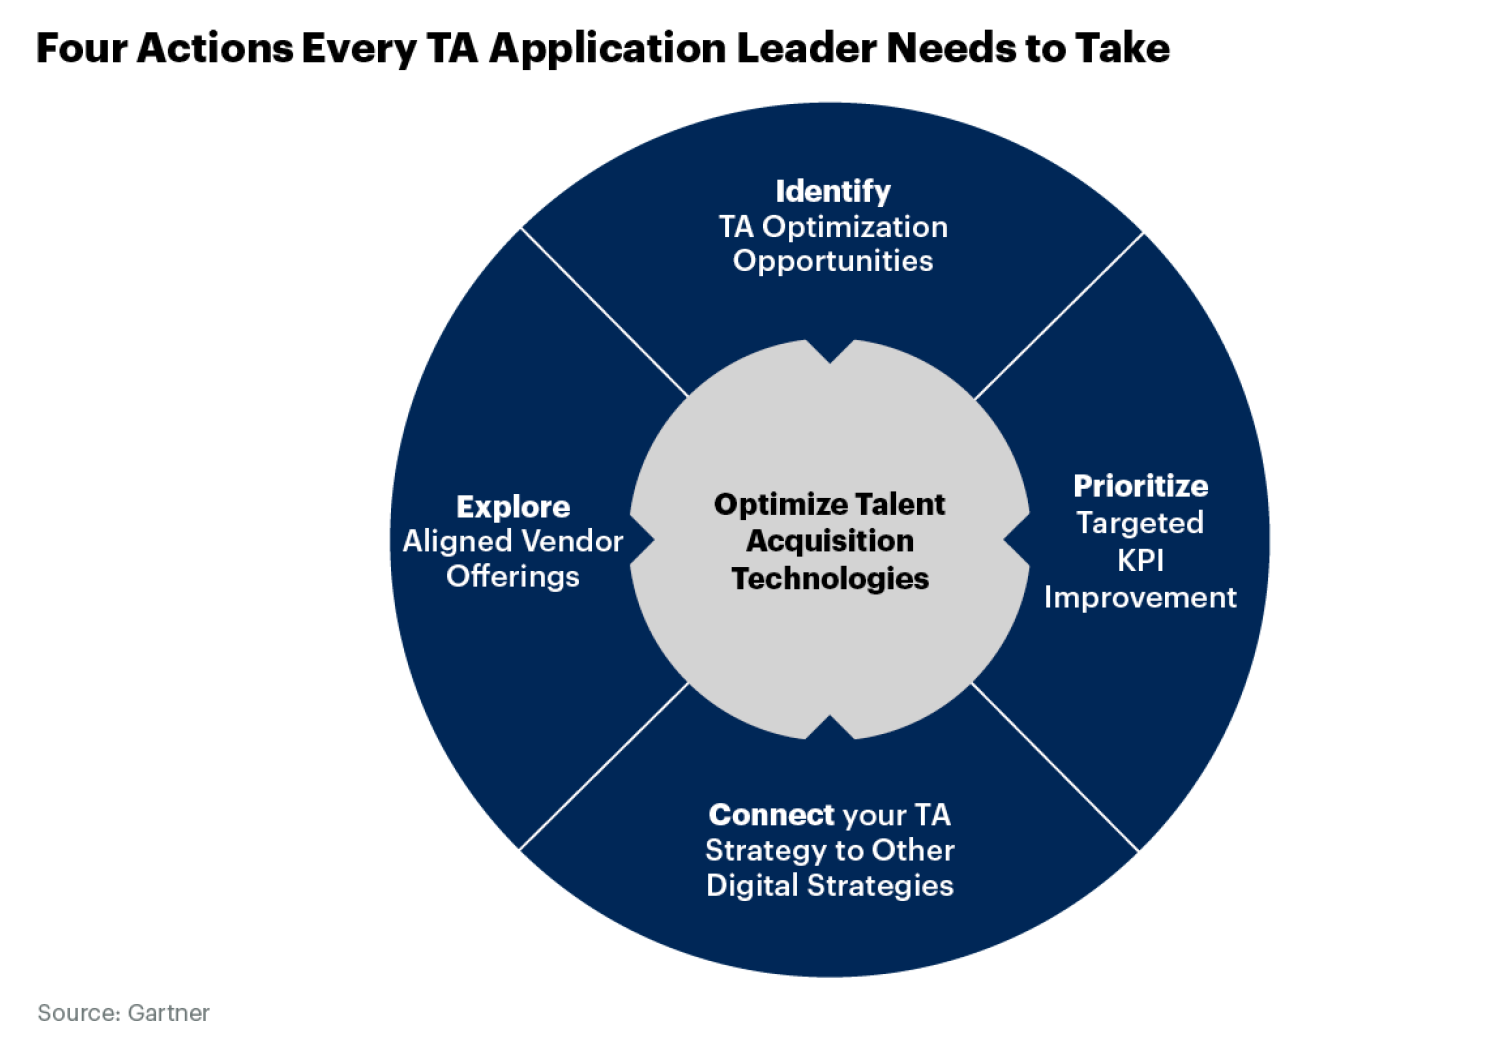 TA leader actions